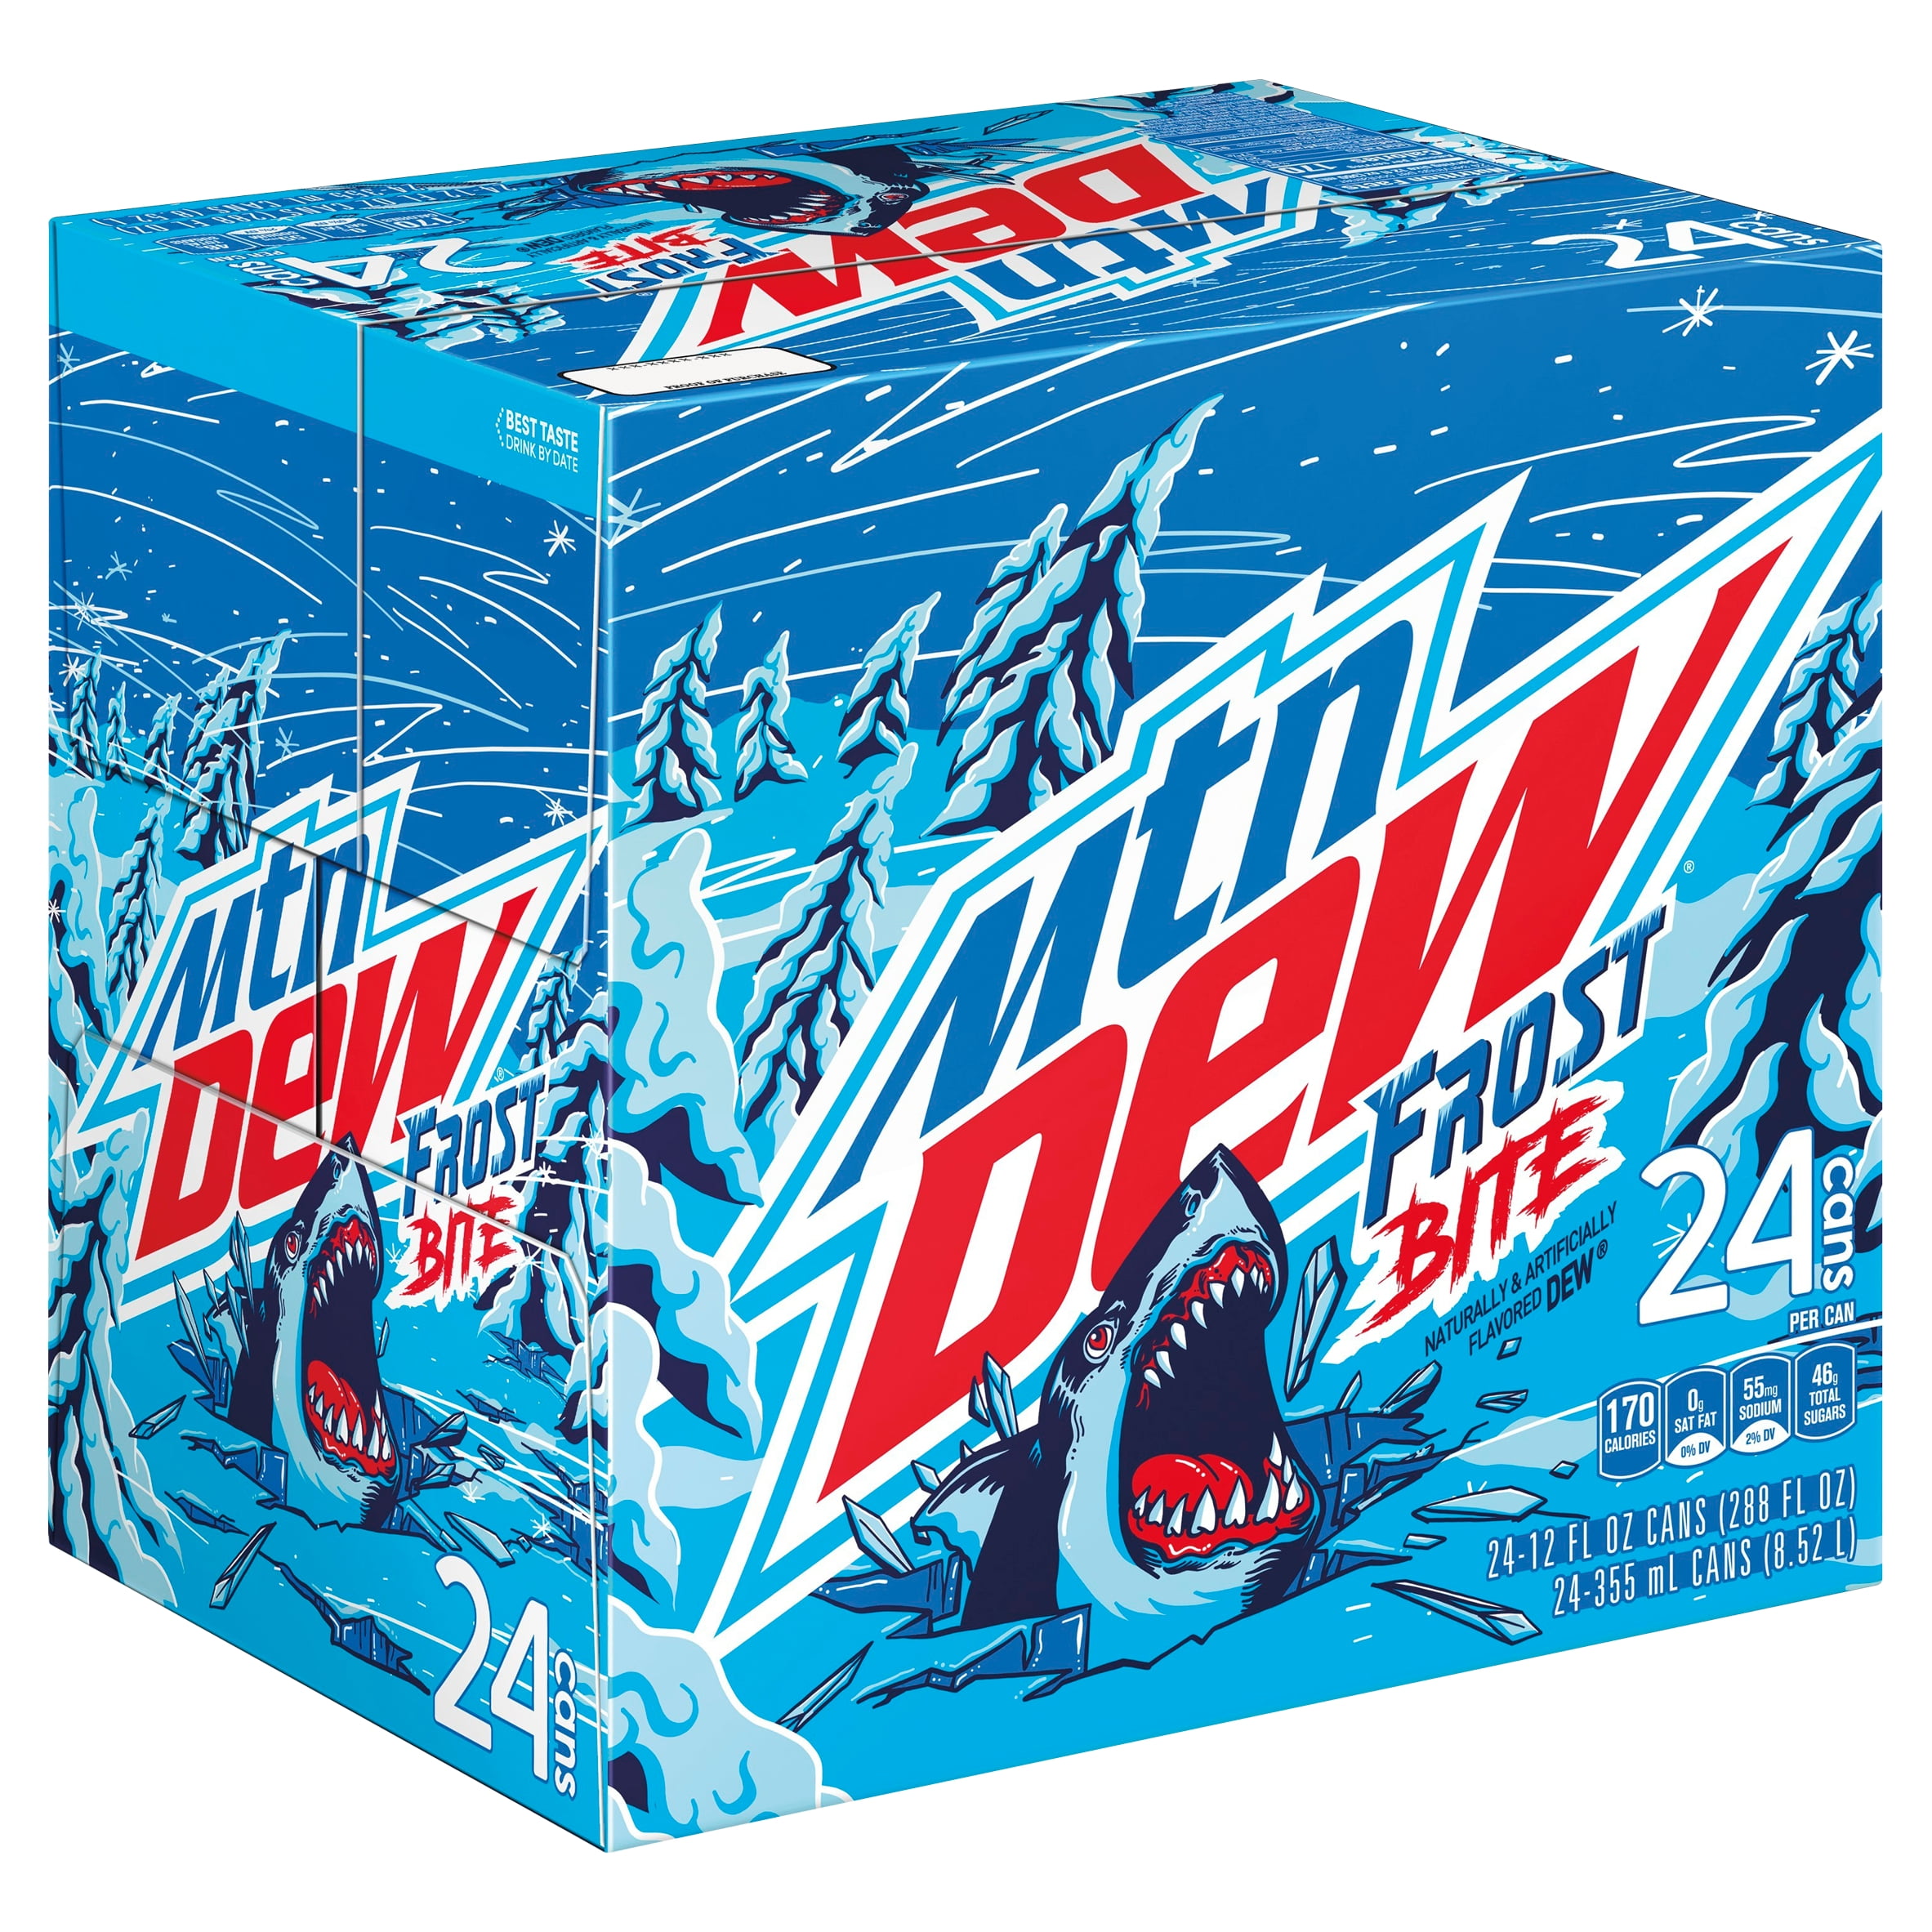 FROSTBITE GREAT PRICE! *1 FULL12 PACK CANS * MOUNTAIN DEW FROST BITE 12 PACK 